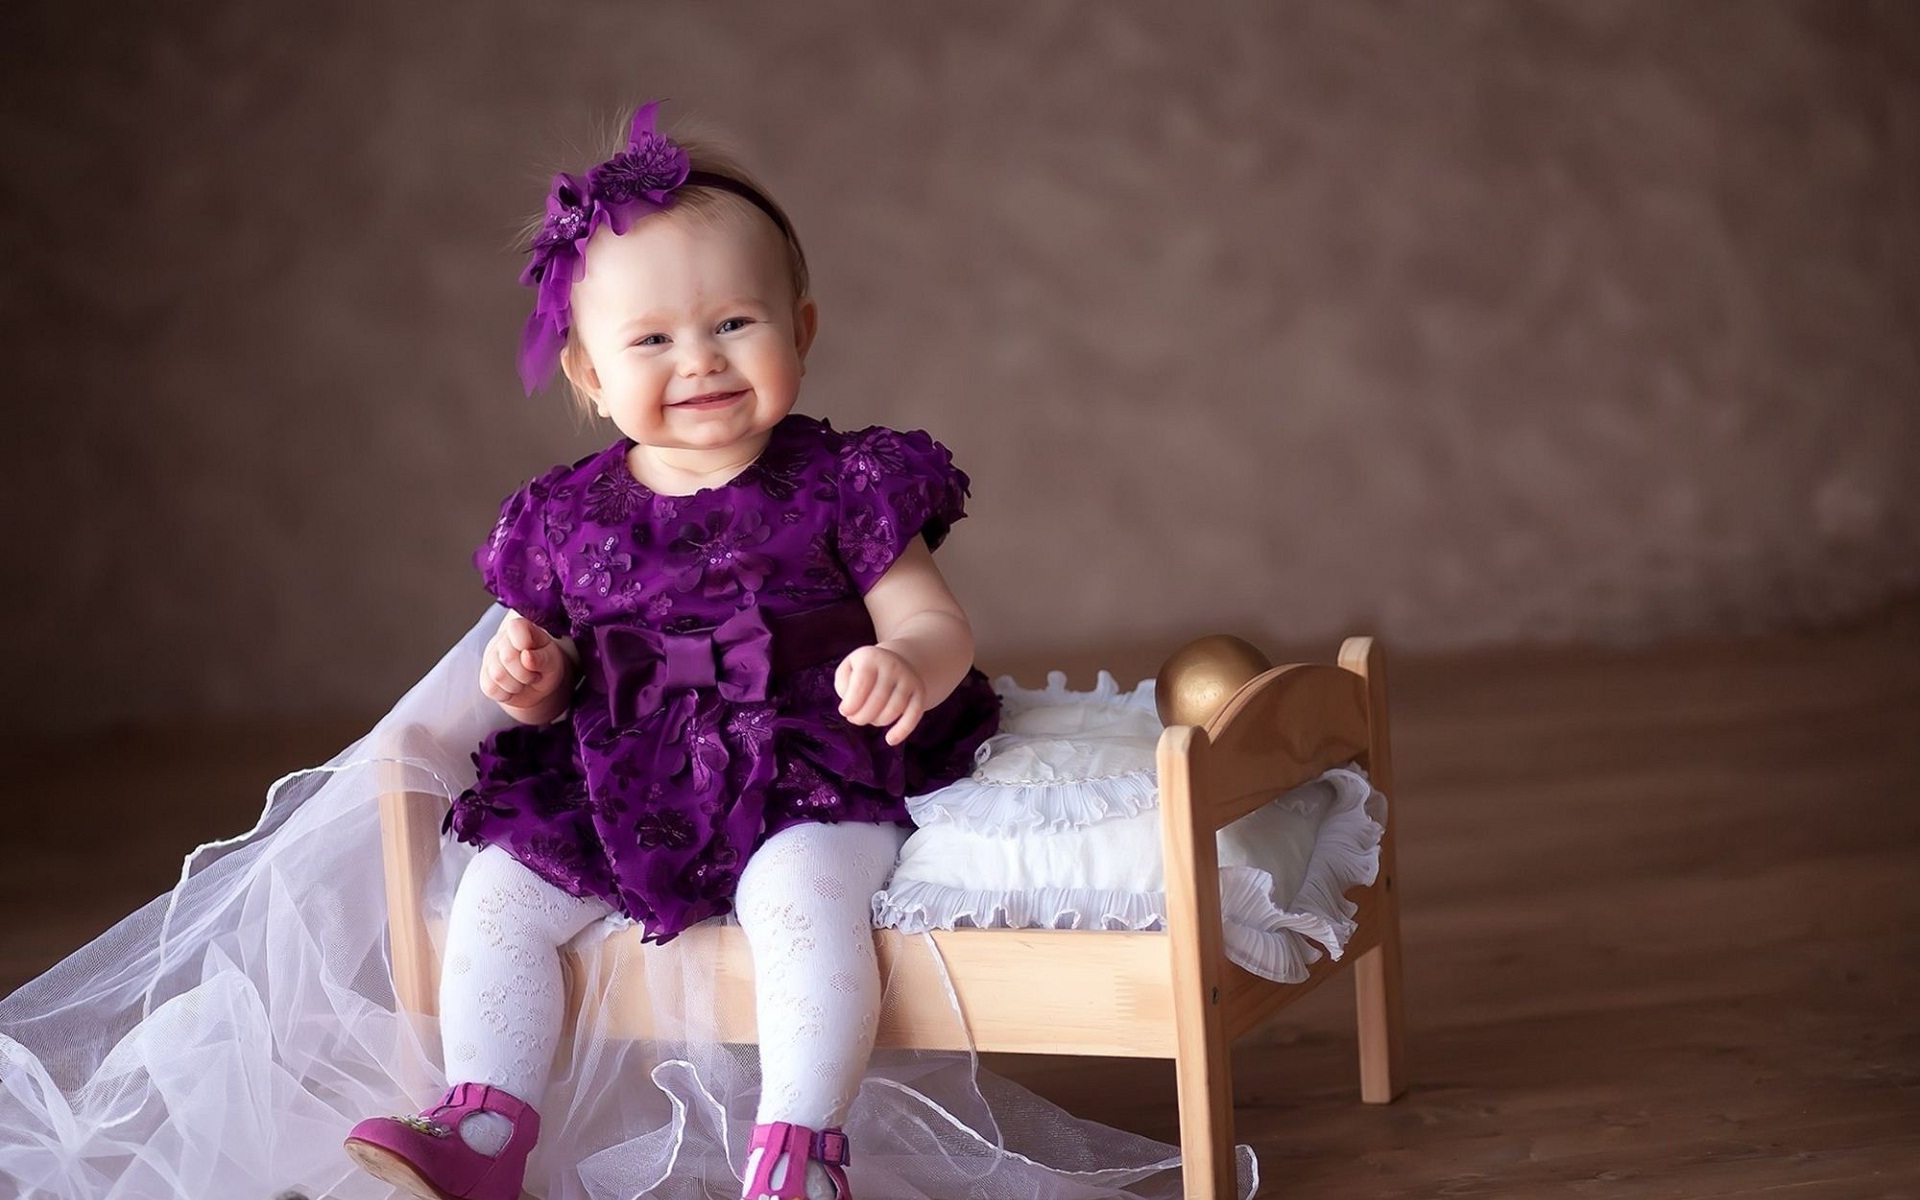 Little Baby Girl Smile Face - Smile Cute Baby Images In Hd , HD Wallpaper & Backgrounds